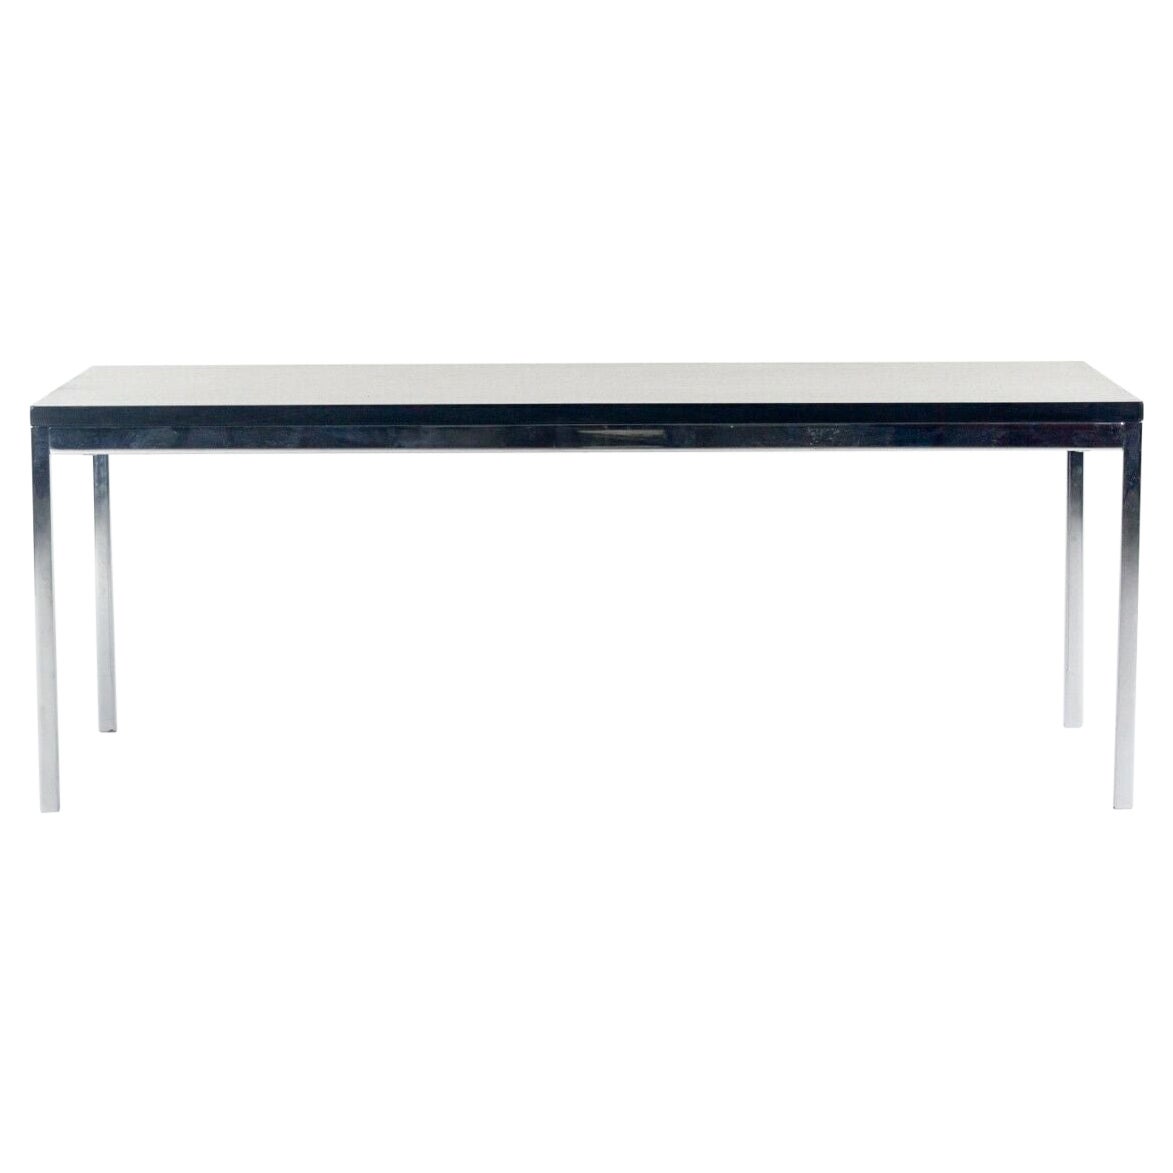 2012 Florence Knoll Ebonized Walnut and Chromed Steel 46 x 22 inch Coffee Table For Sale